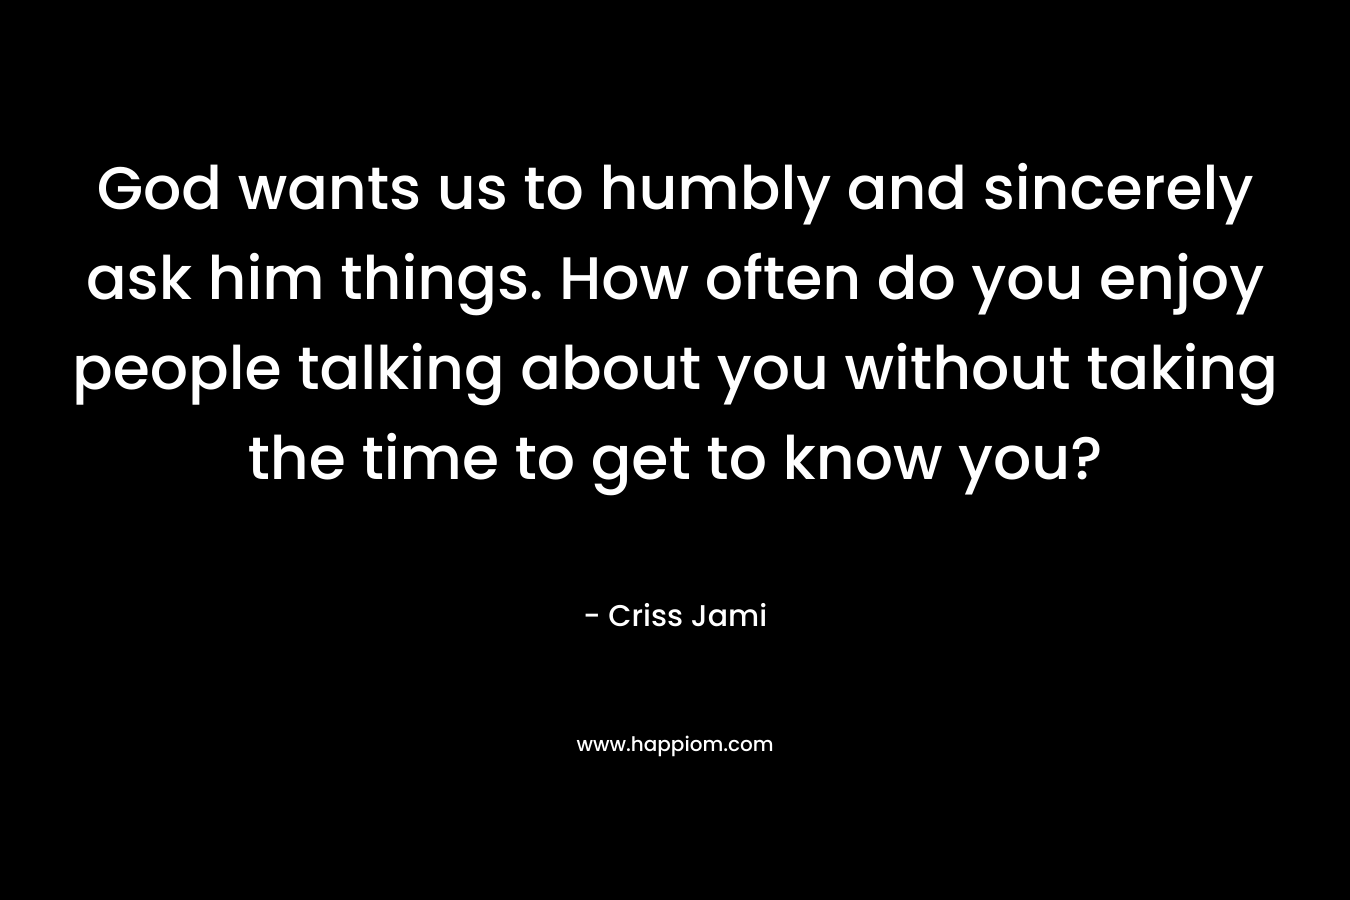 God wants us to humbly and sincerely ask him things. How often do you enjoy people talking about you without taking the time to get to know you?